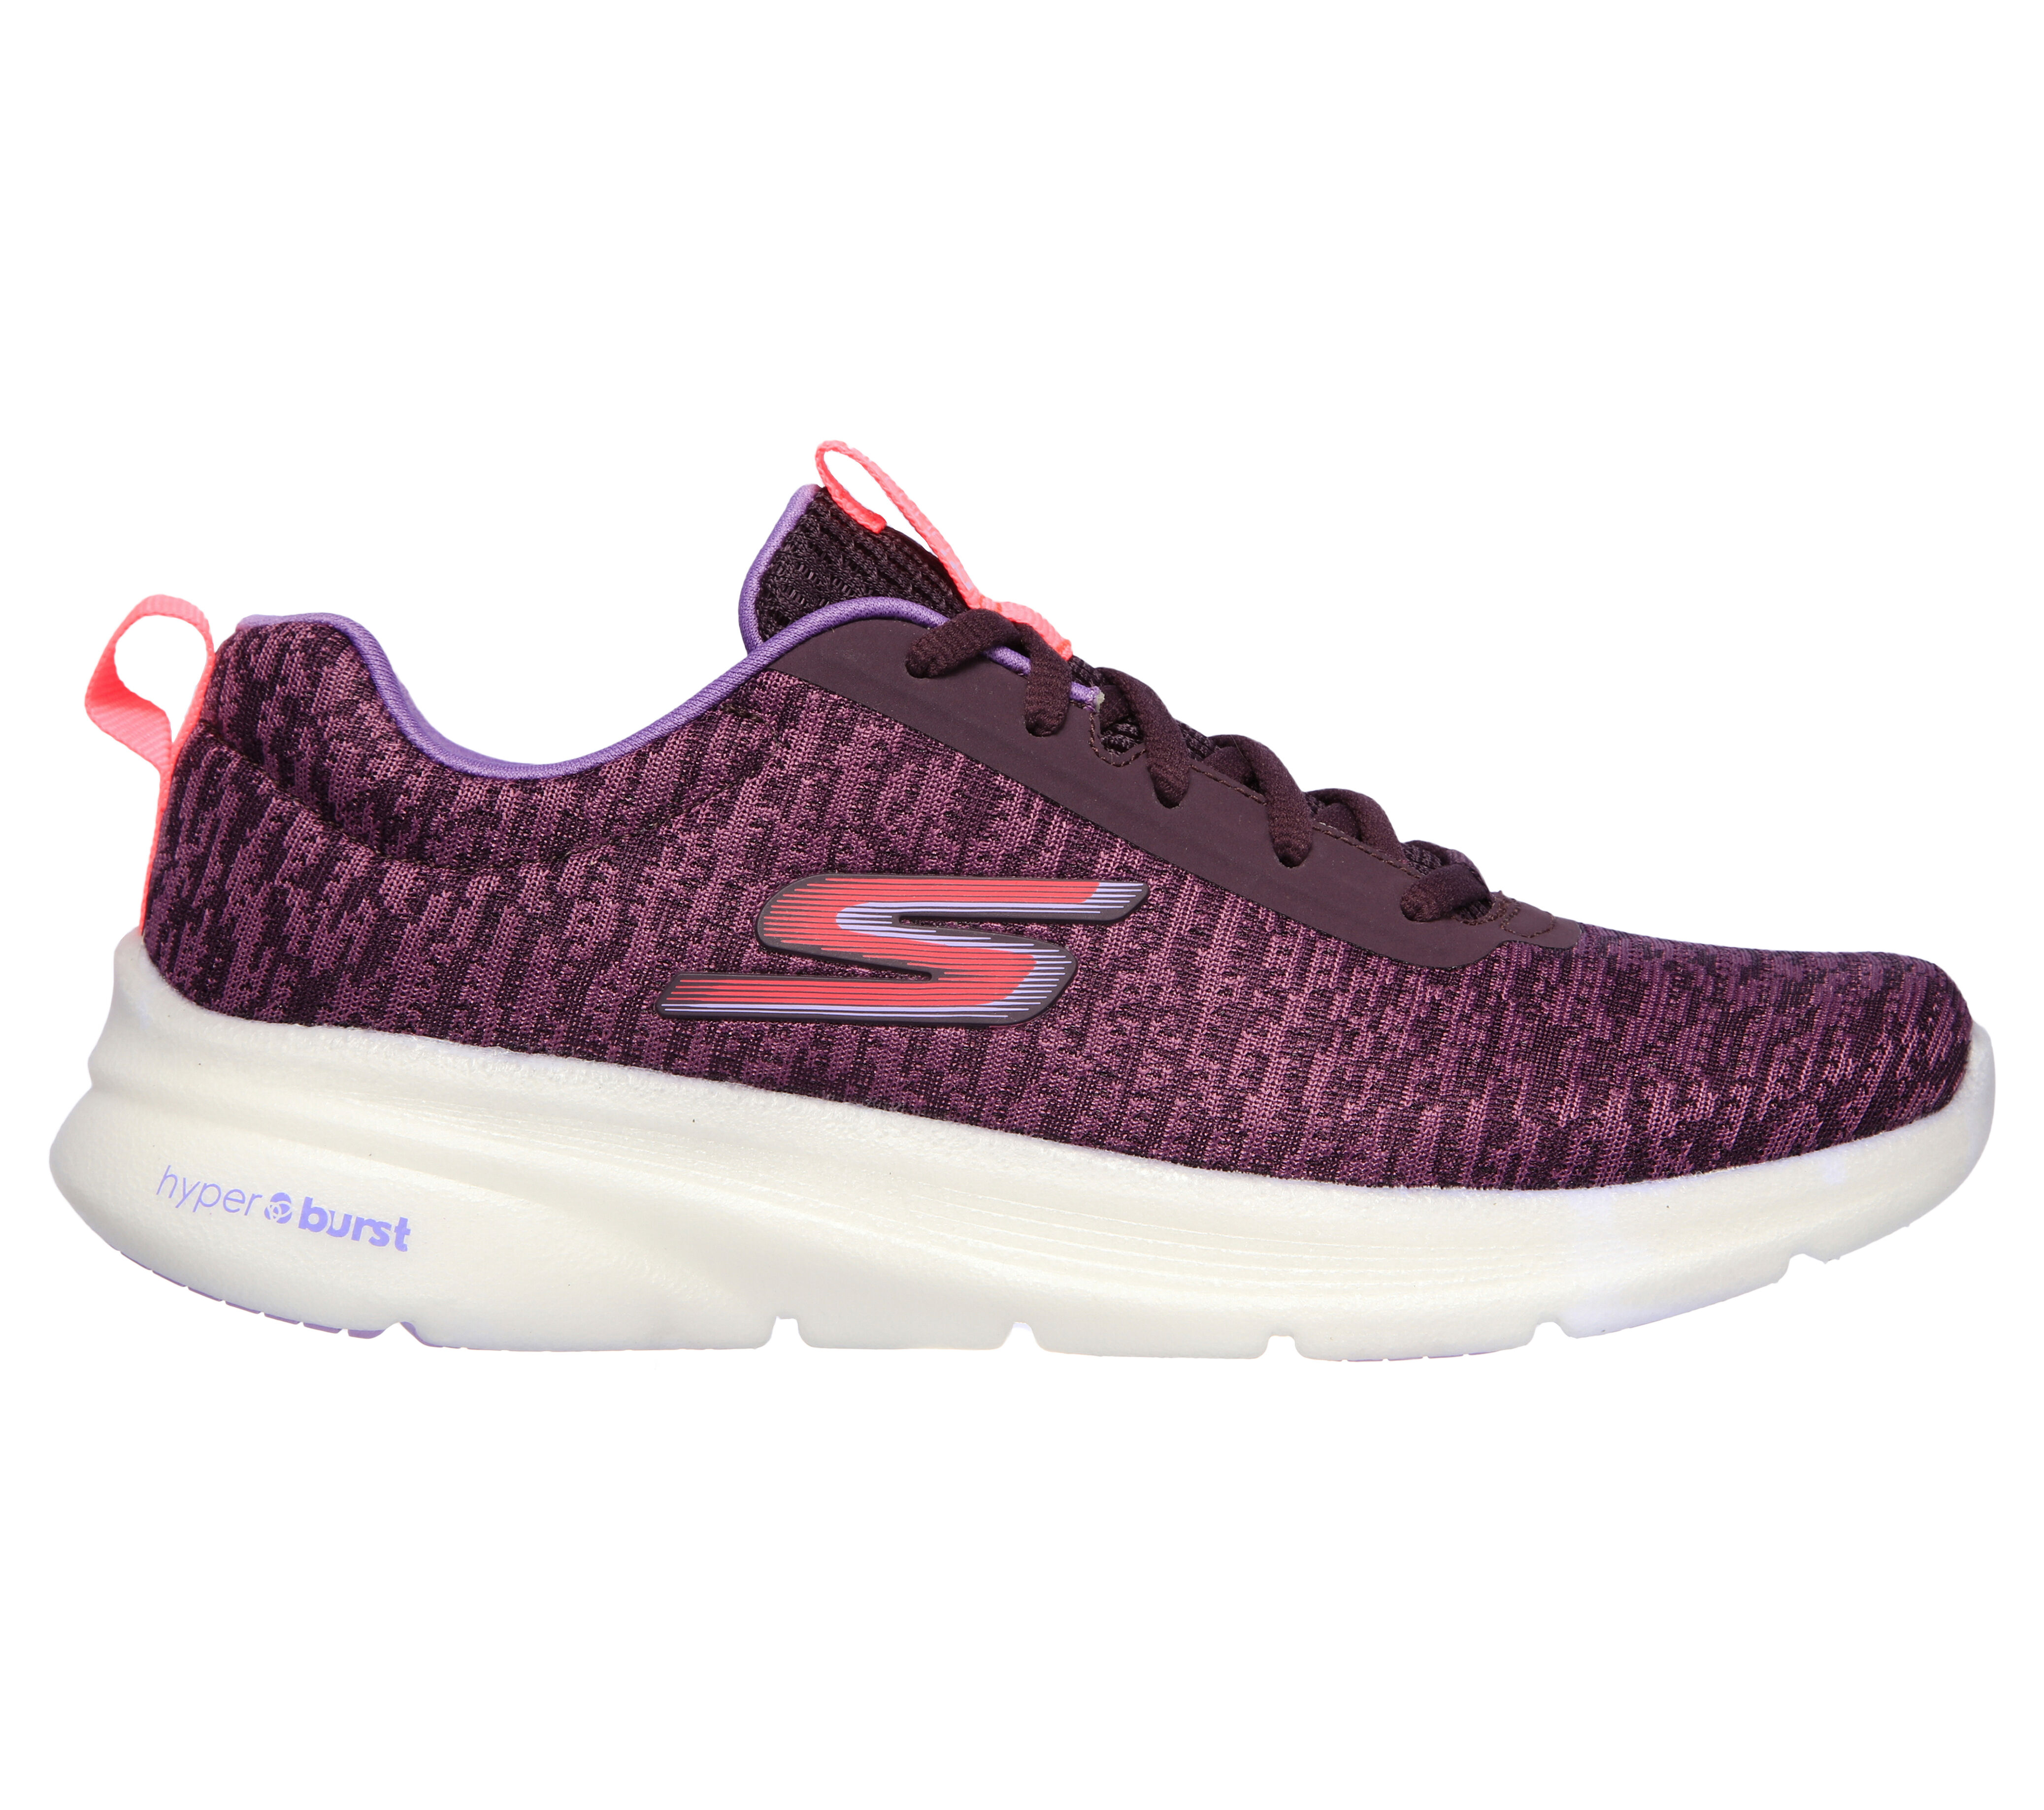 cheapest place to buy skechers